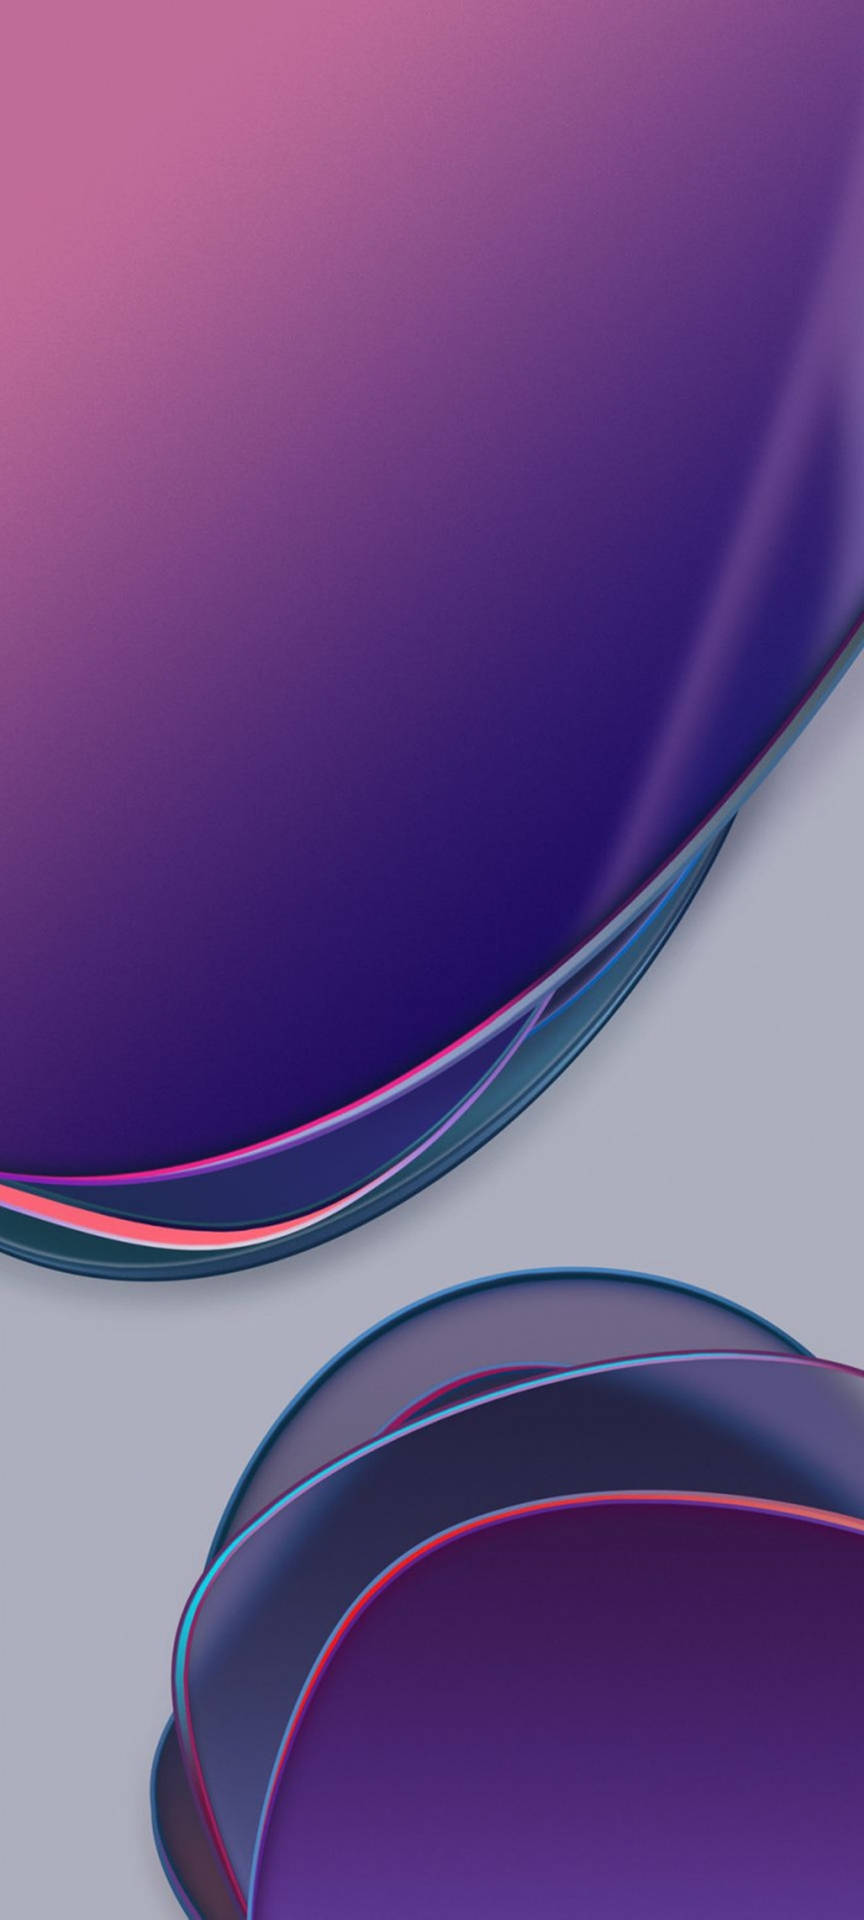 Download Oneplus 9 Pro Abstract Violet Wallpaper 